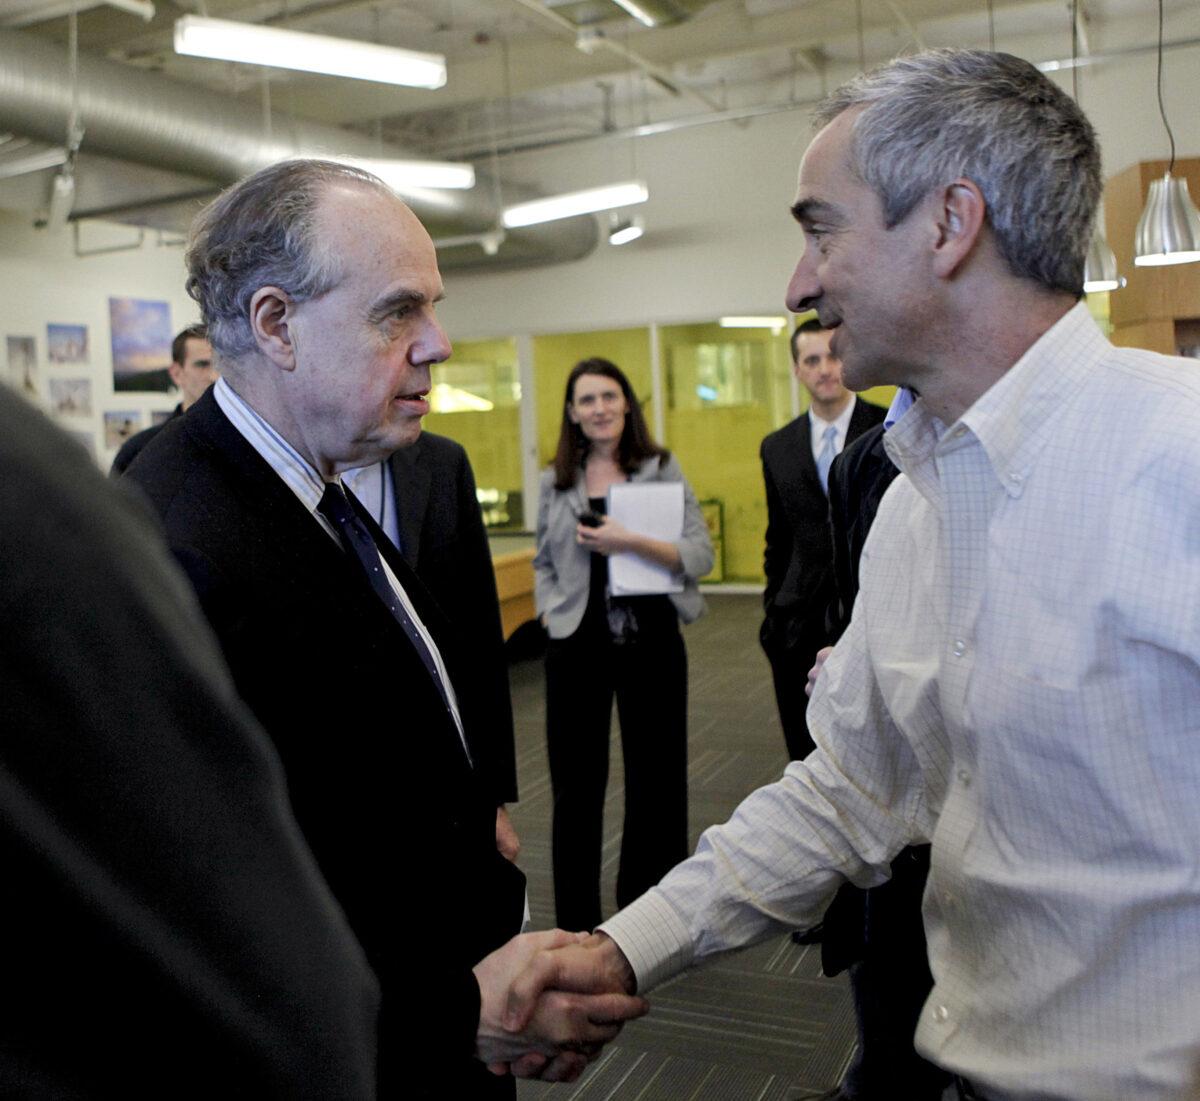 In this file photo, Patrick Pichette, then-CFO at Google (R) shakes hands with French Minister for Culture and Communication Frederic Mitterrand (L) at Google's headquarters in Mountain View, Calif., on March 11, 2011. (Ryan Anson/AFP/Getty Images)